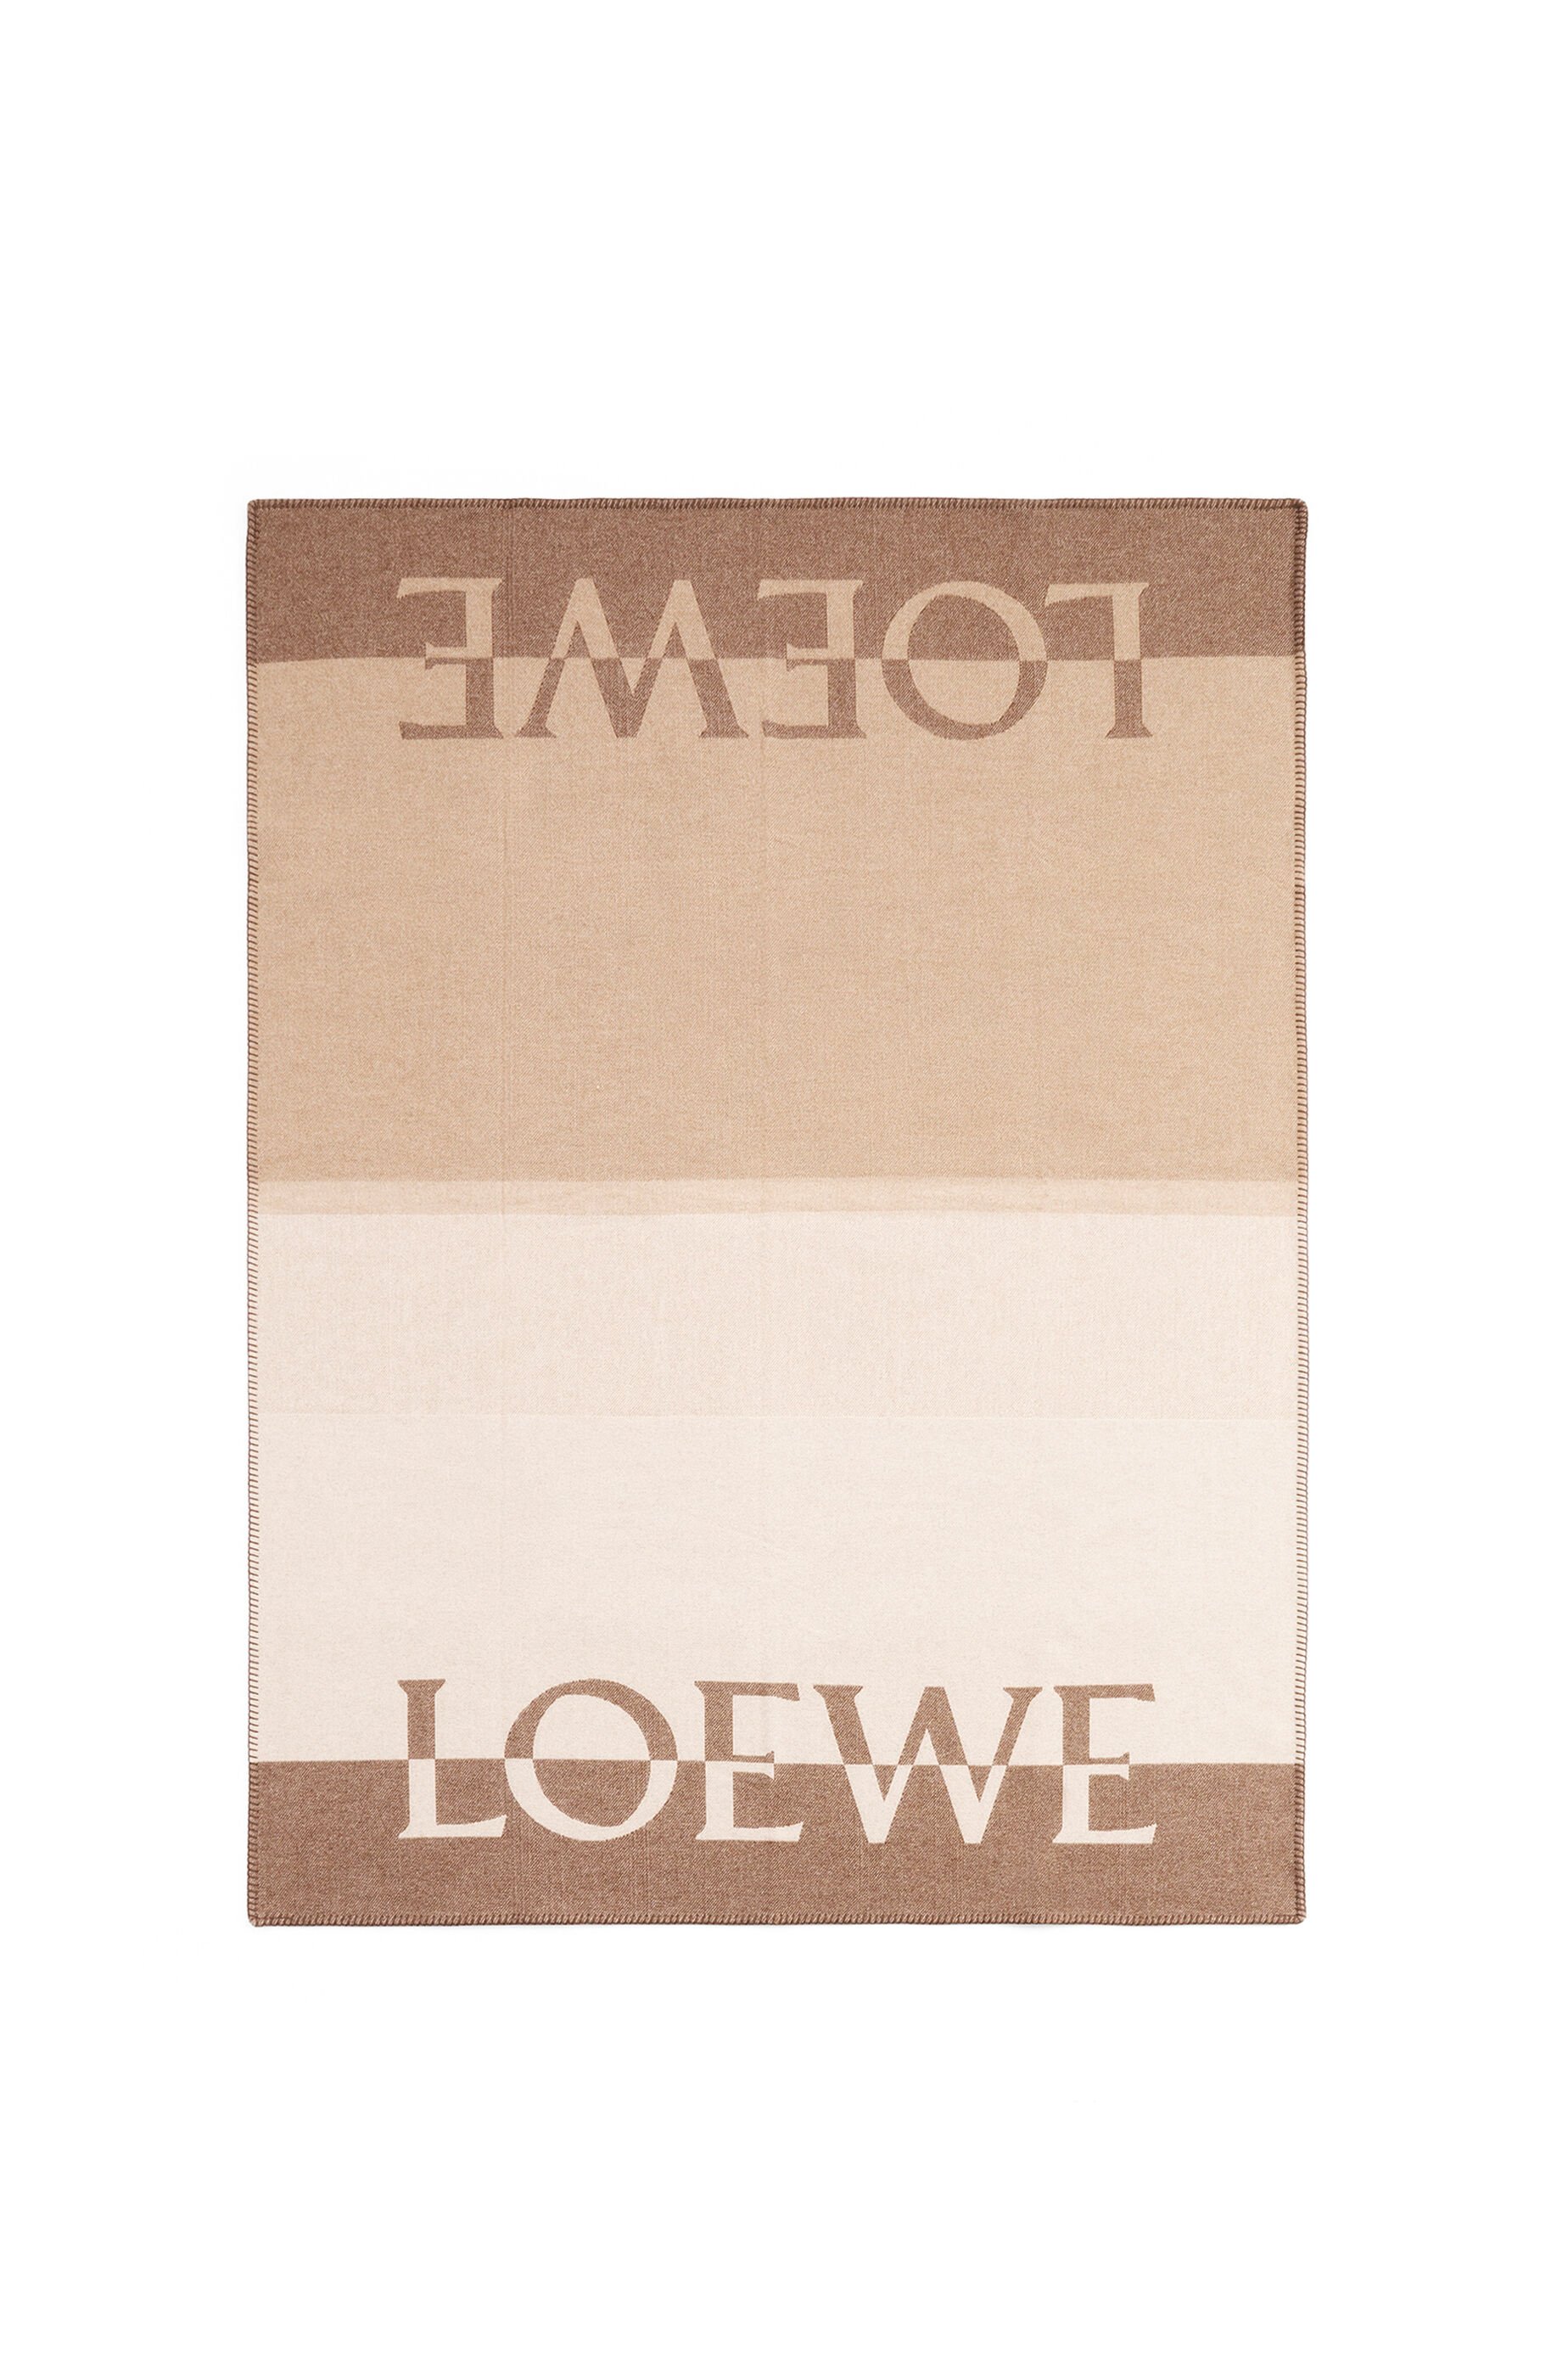 LOEWE blanket in wool and cashmere